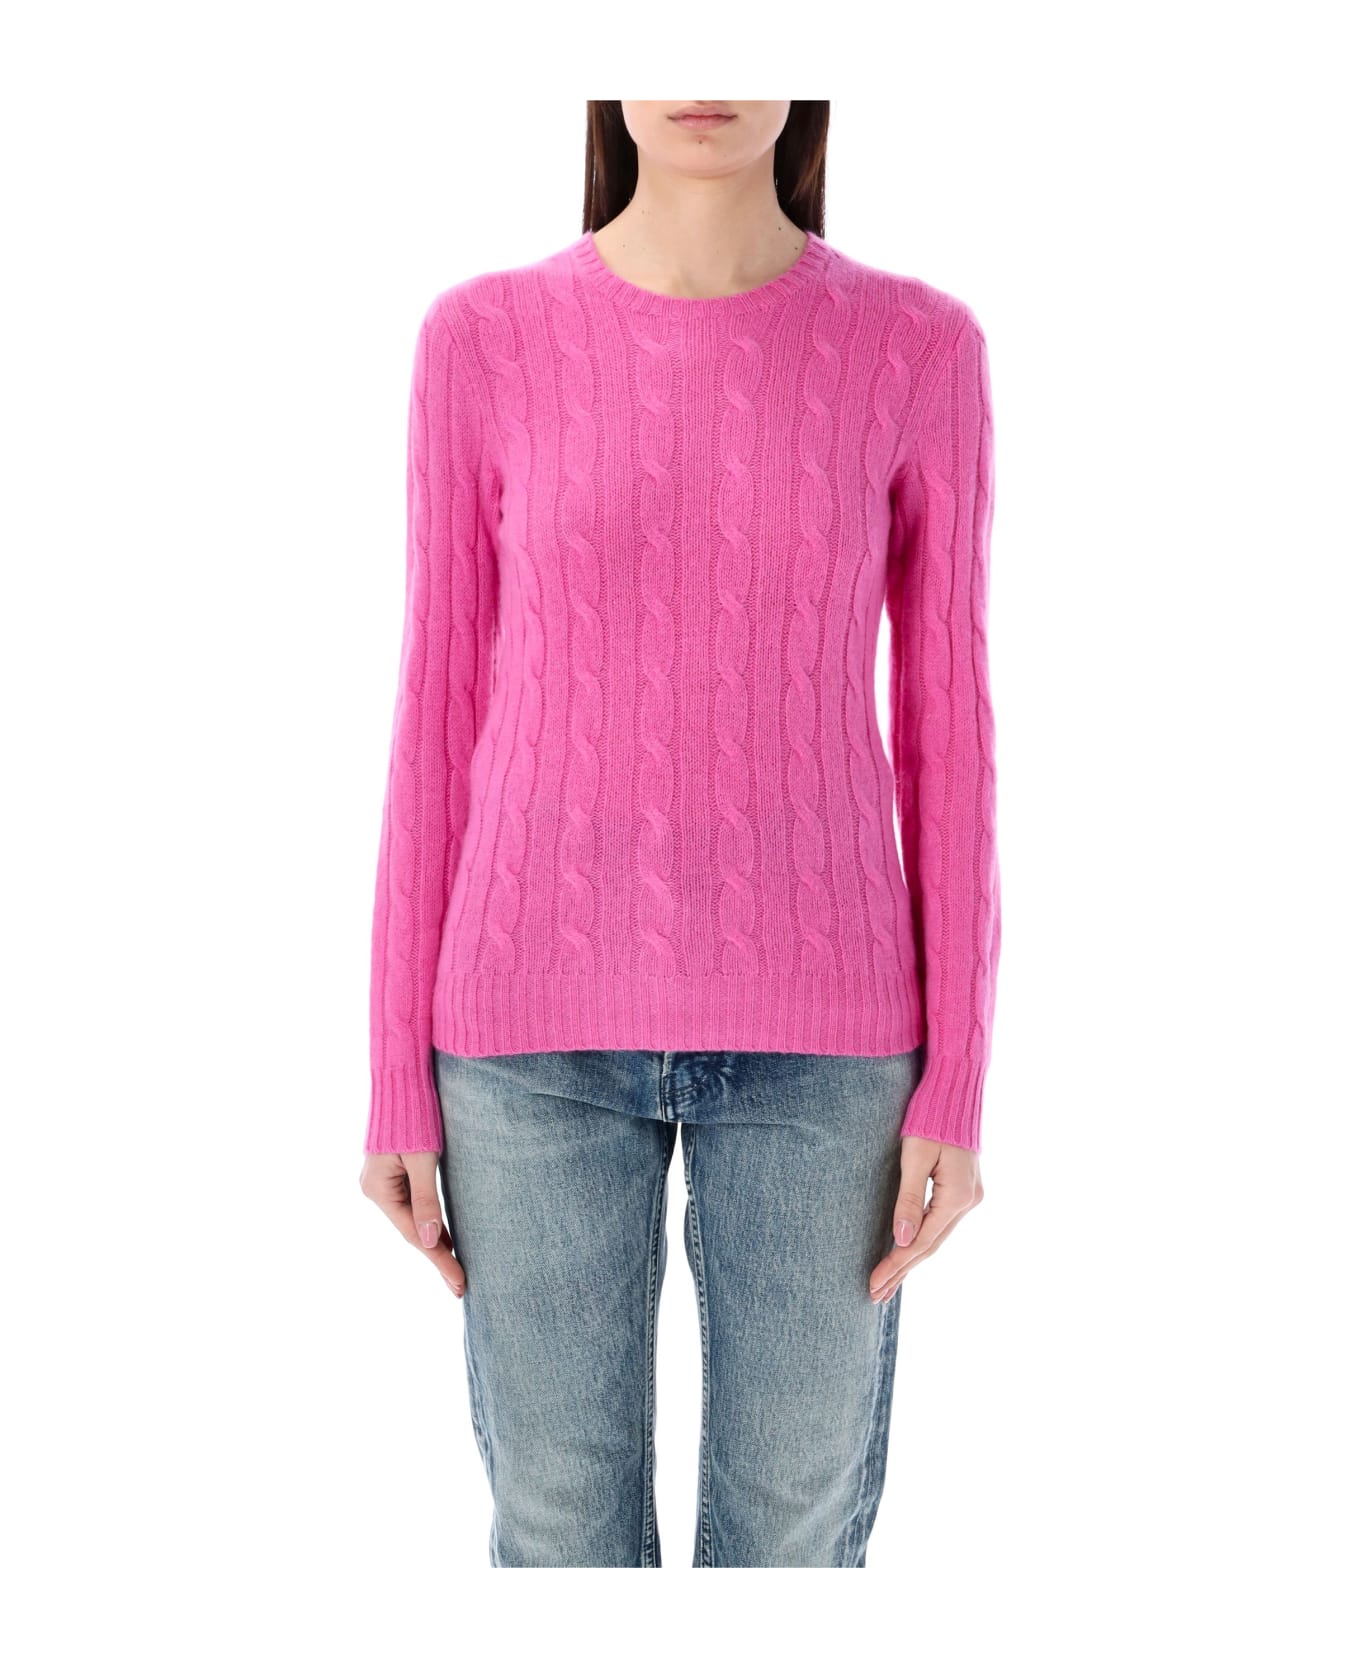 Polo Ralph Lauren Julianna Cable Knit Sweater - PINK FUXIA